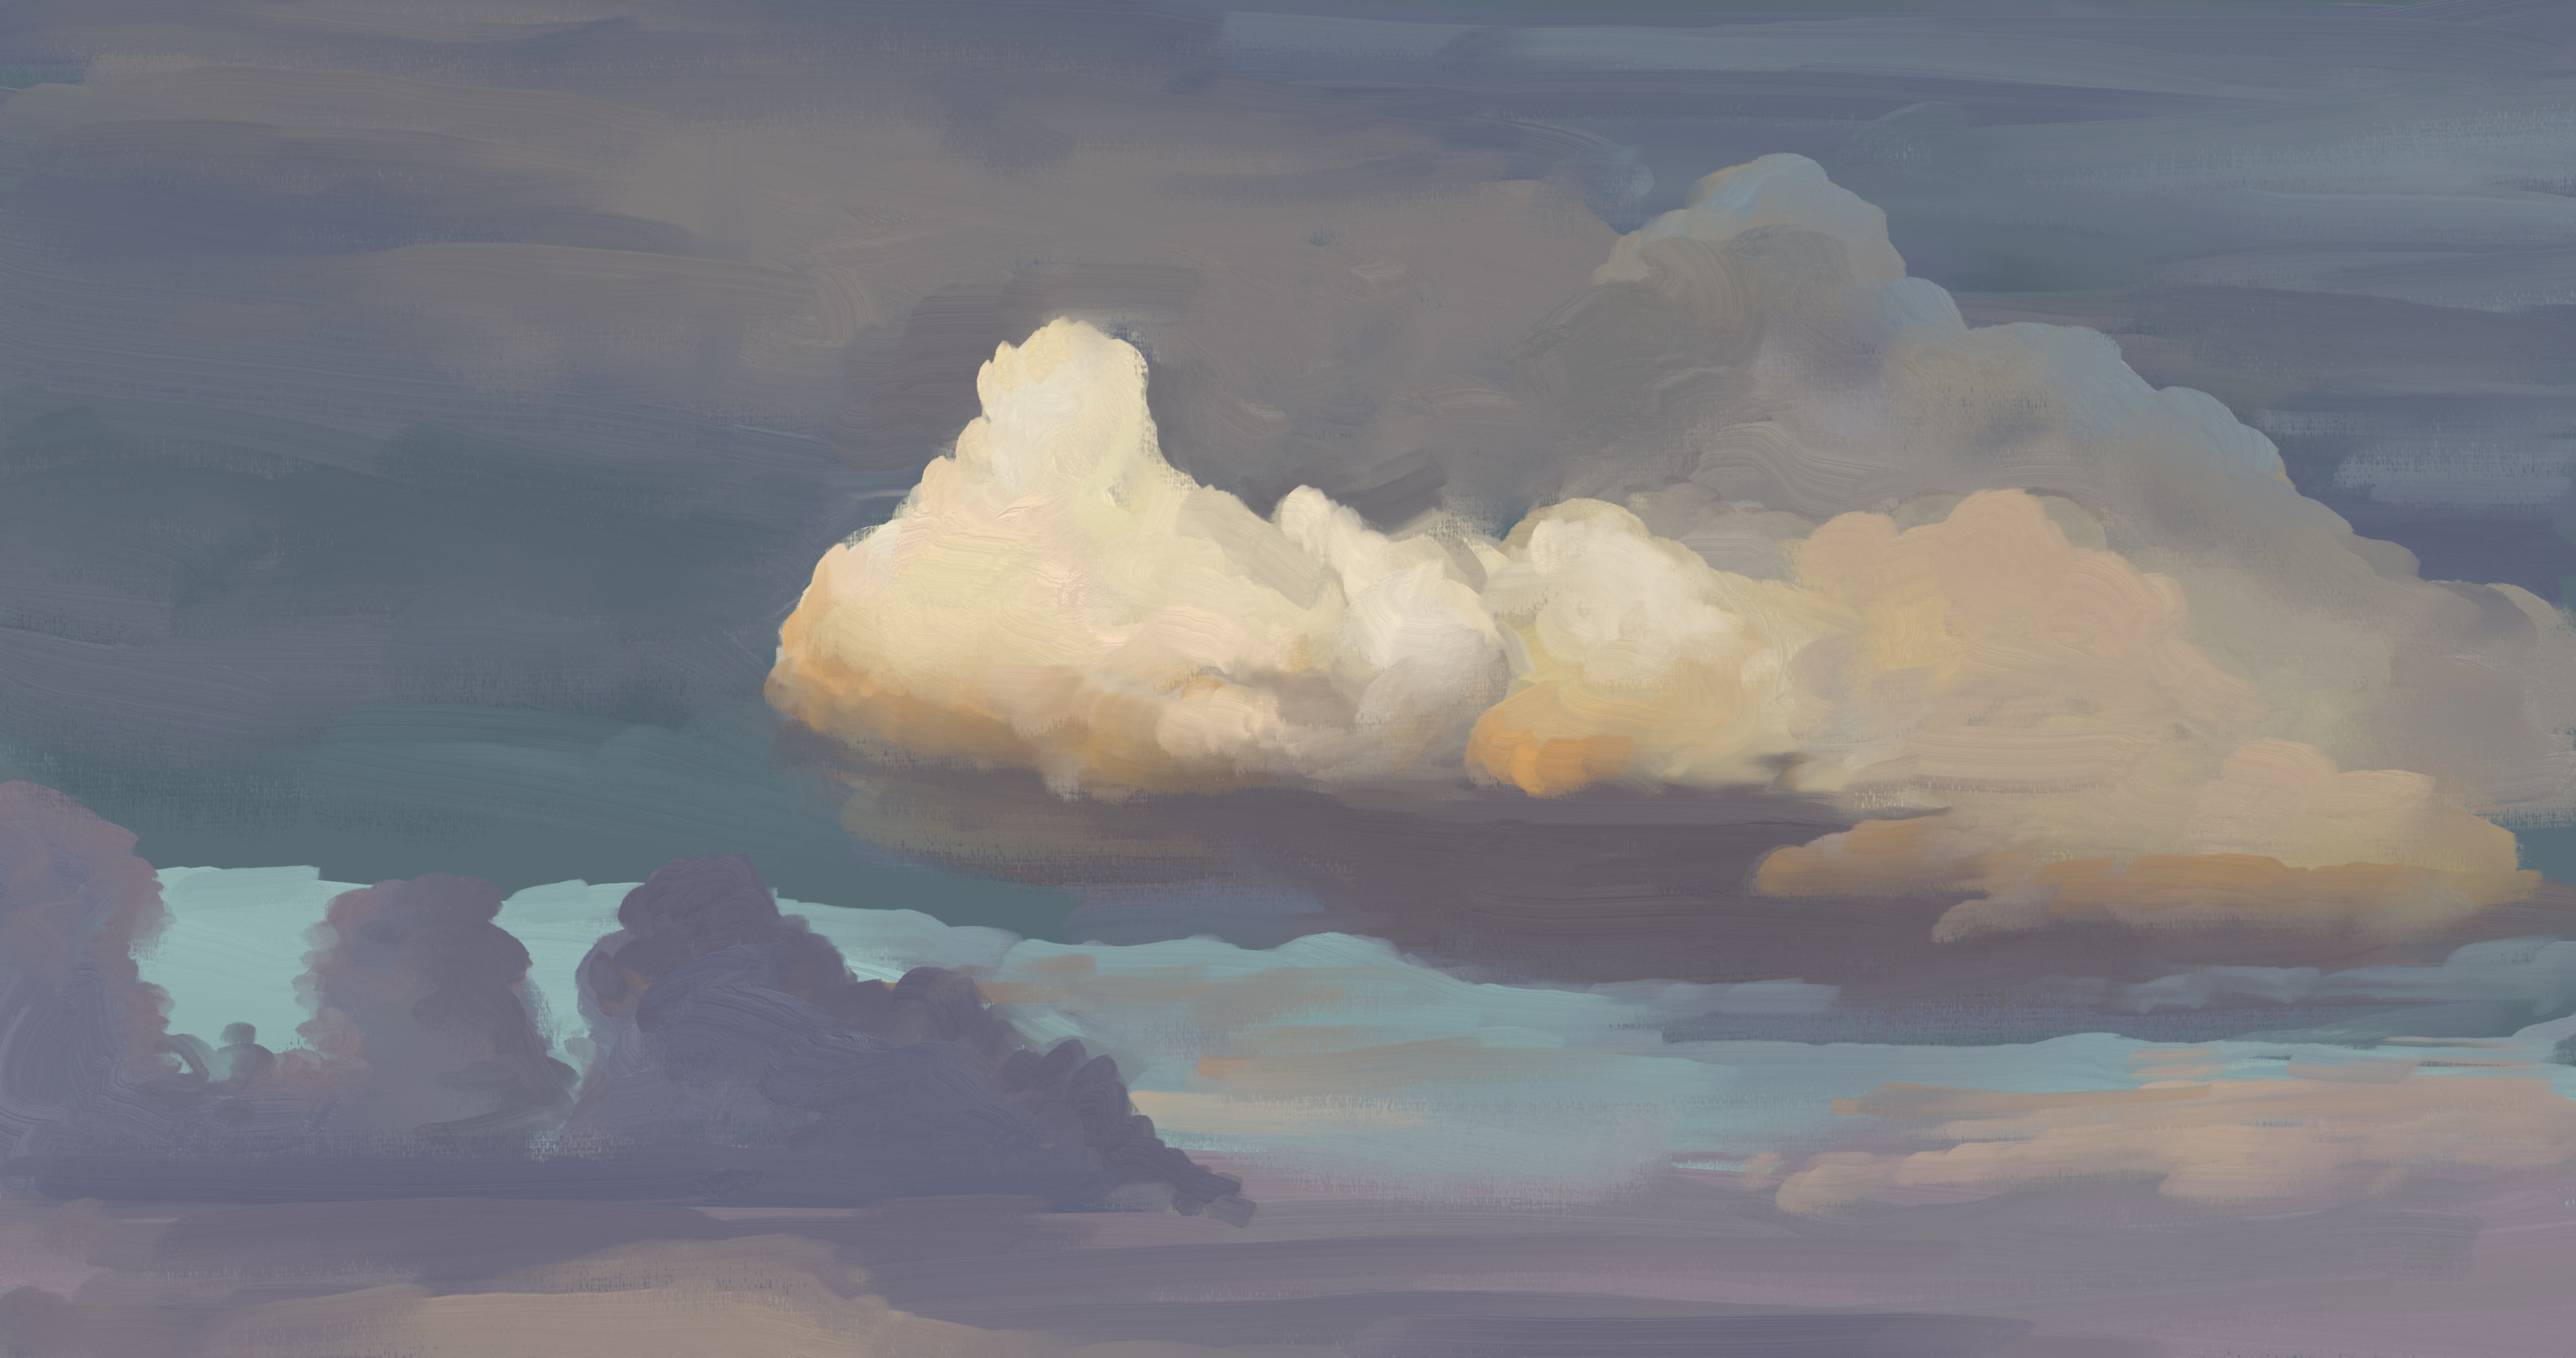 Land Anywhere Concept Design Illustration Cloudy At Xander Flight Of Dragons On A Cloudy Sky